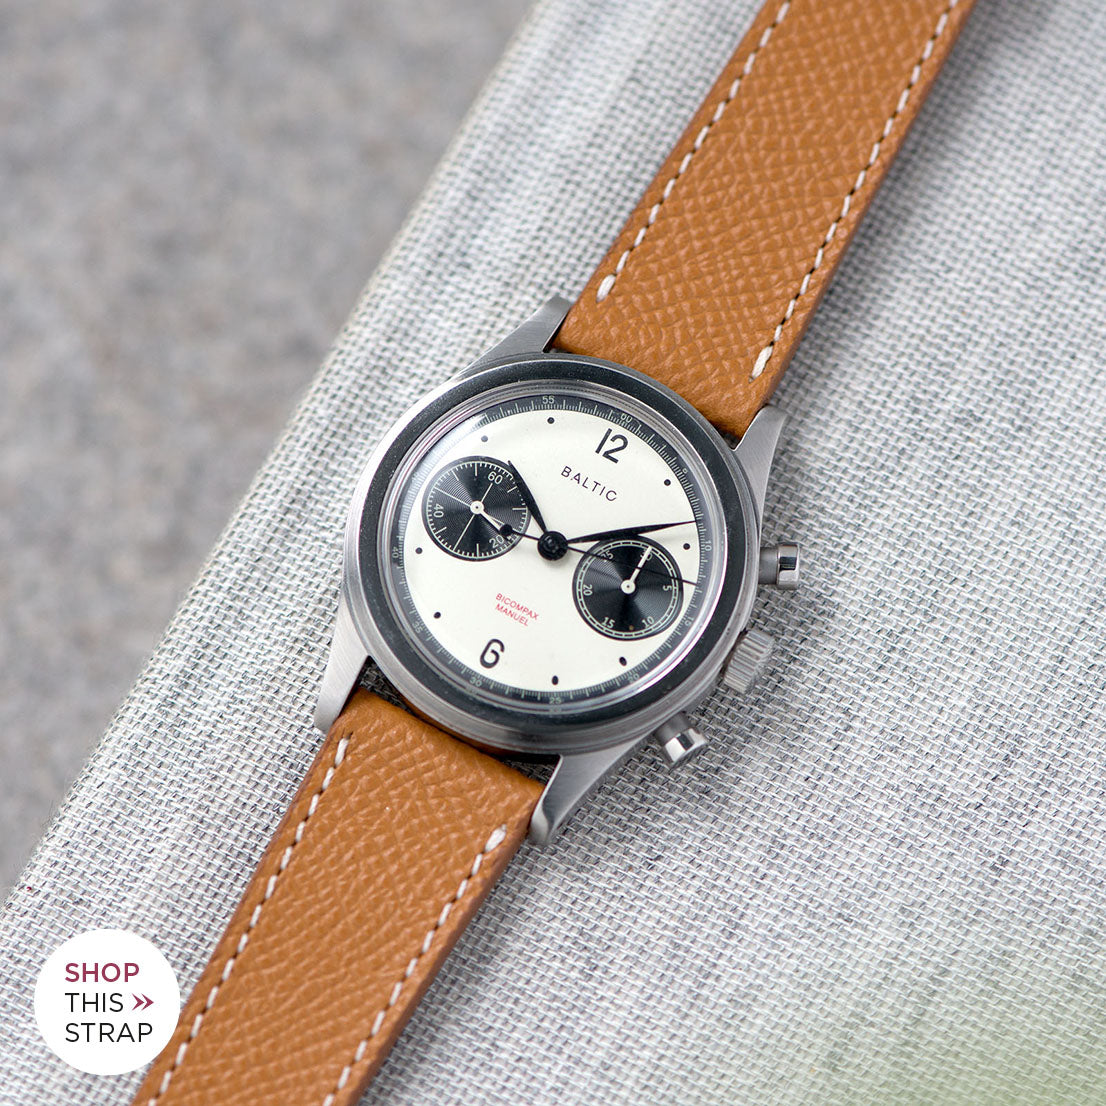 Bulang and Sons_Strap Guide_The Baltic-Chronograph-Panda-Limited-Edition_Cognac Brown Leather Watch Strap